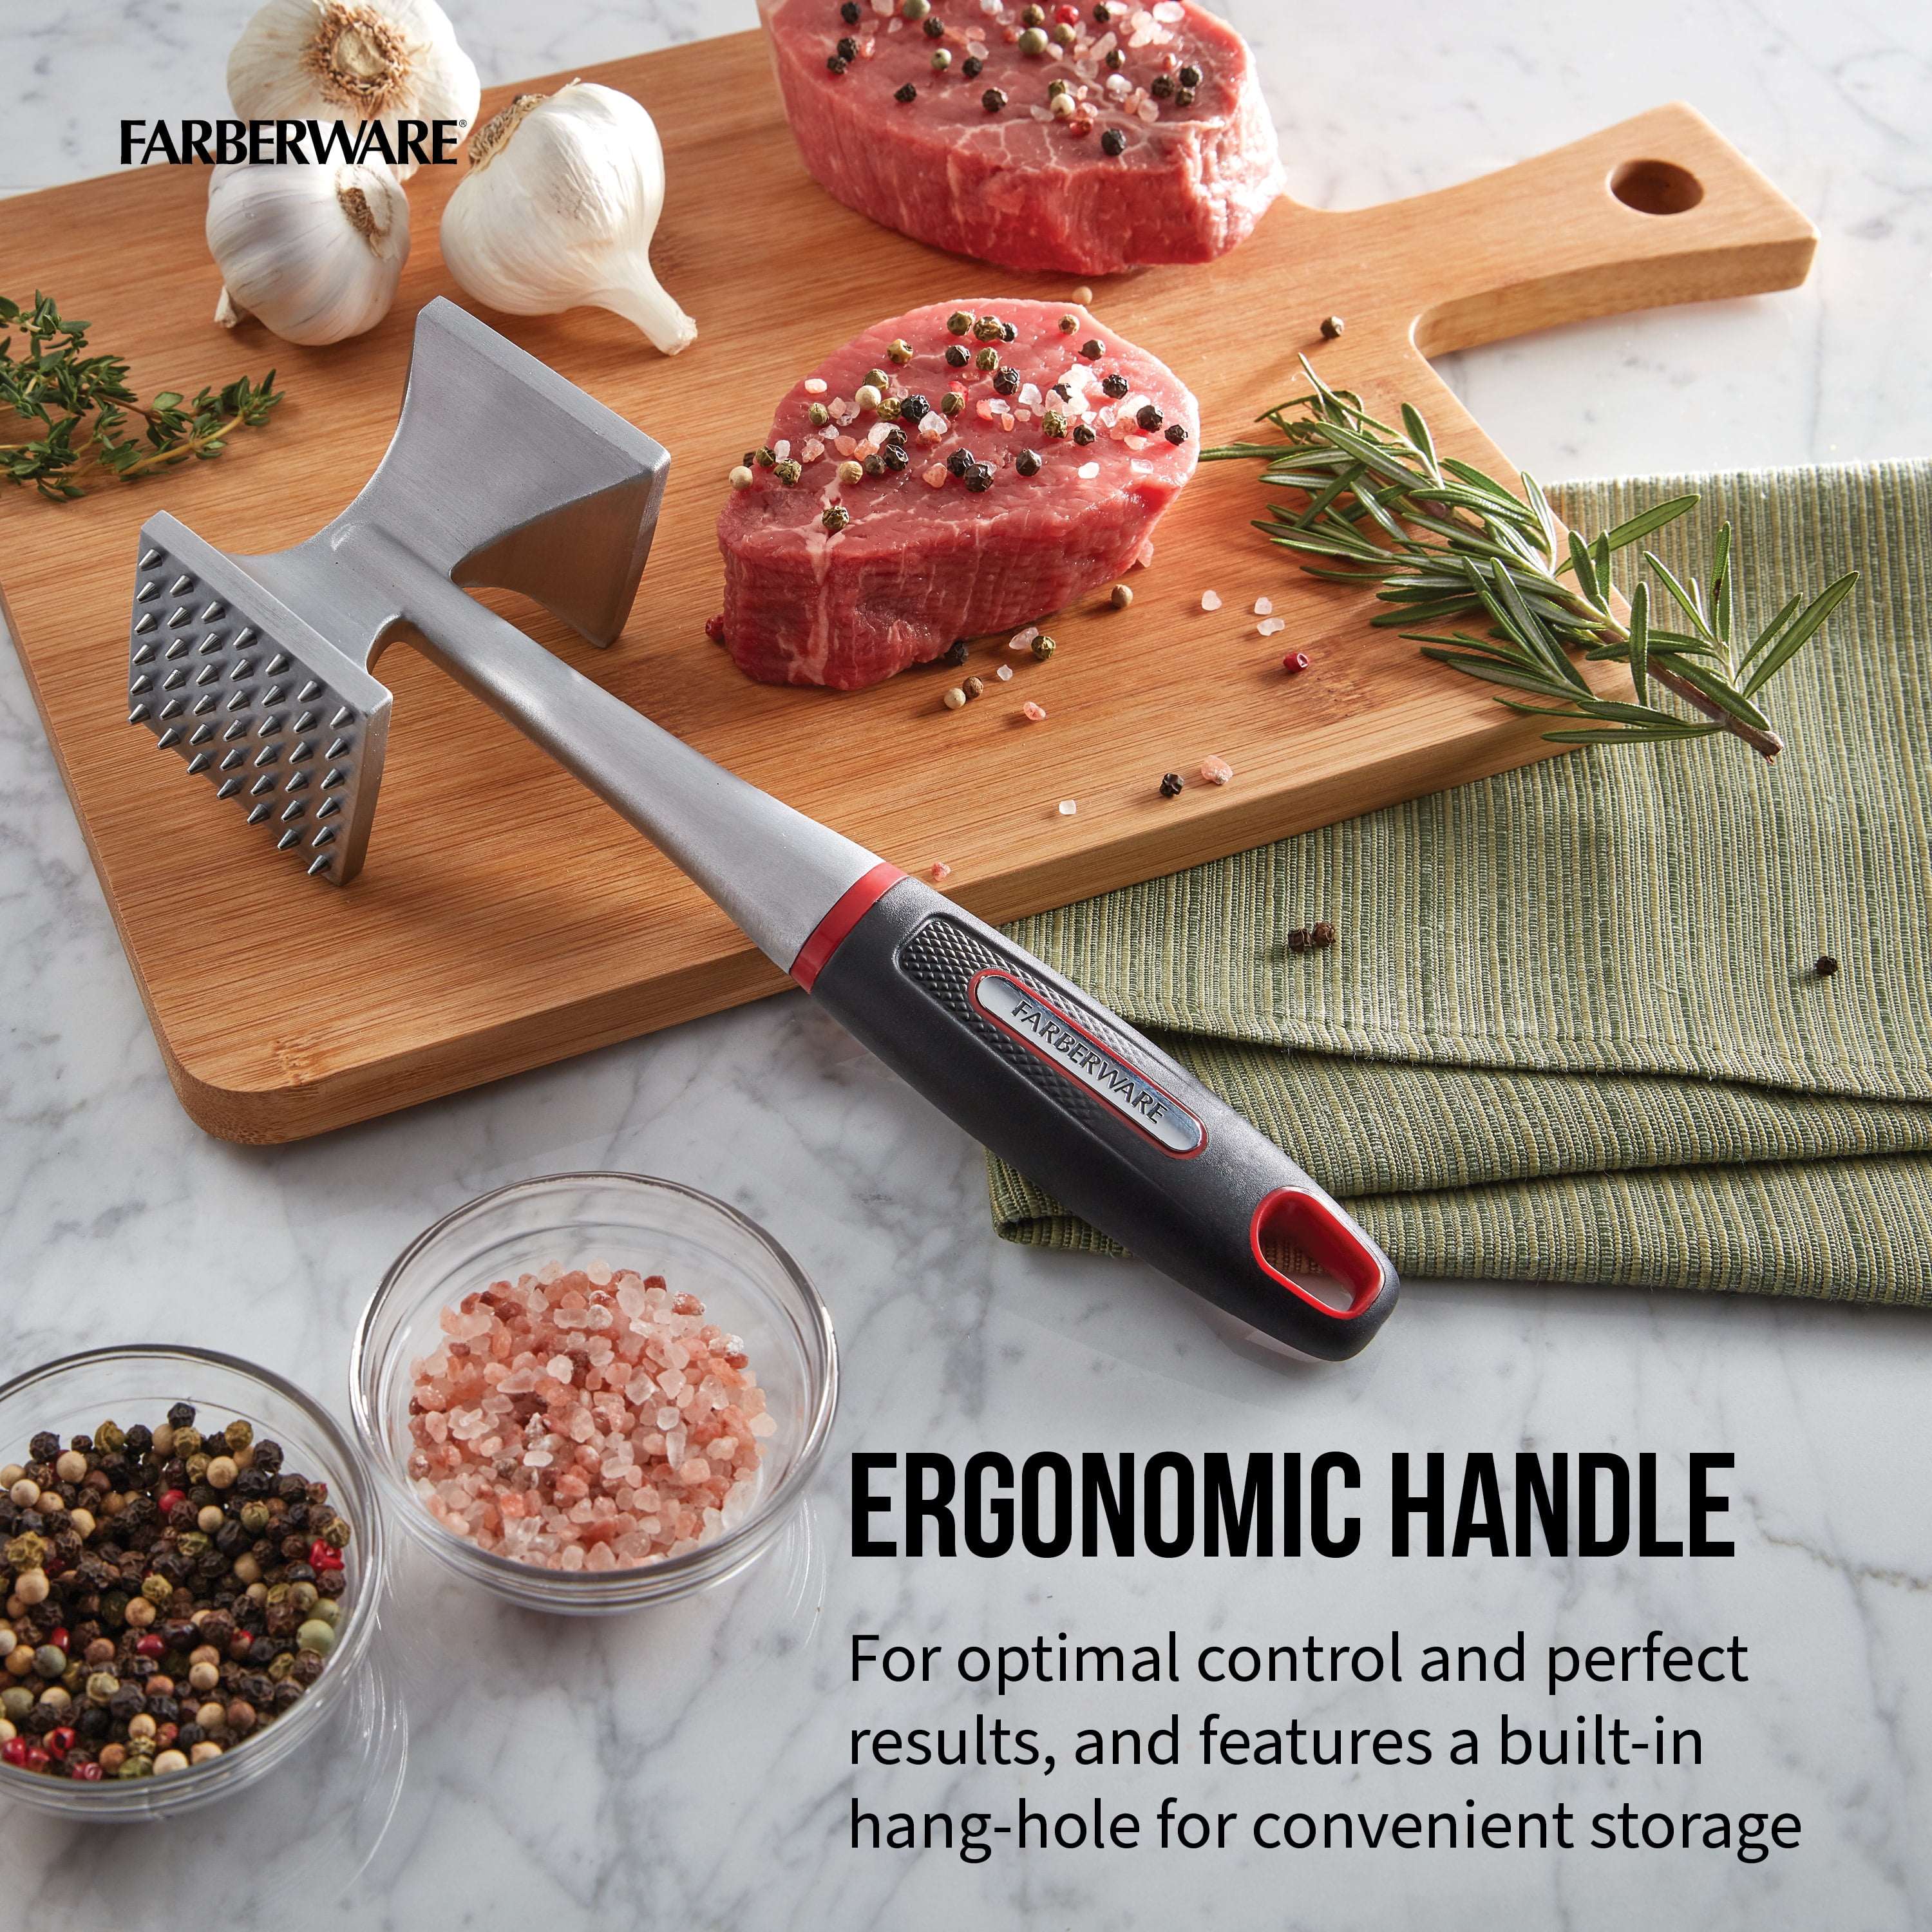  Farberware Professional Dual-Sided Rigid and Texture Stainless  Steel Meat Tenderizer with Comfort Grip Handle, Great for Pounding Meat,  Shellfish, Nuts, Dishwasher Safe, Black: Home & Kitchen